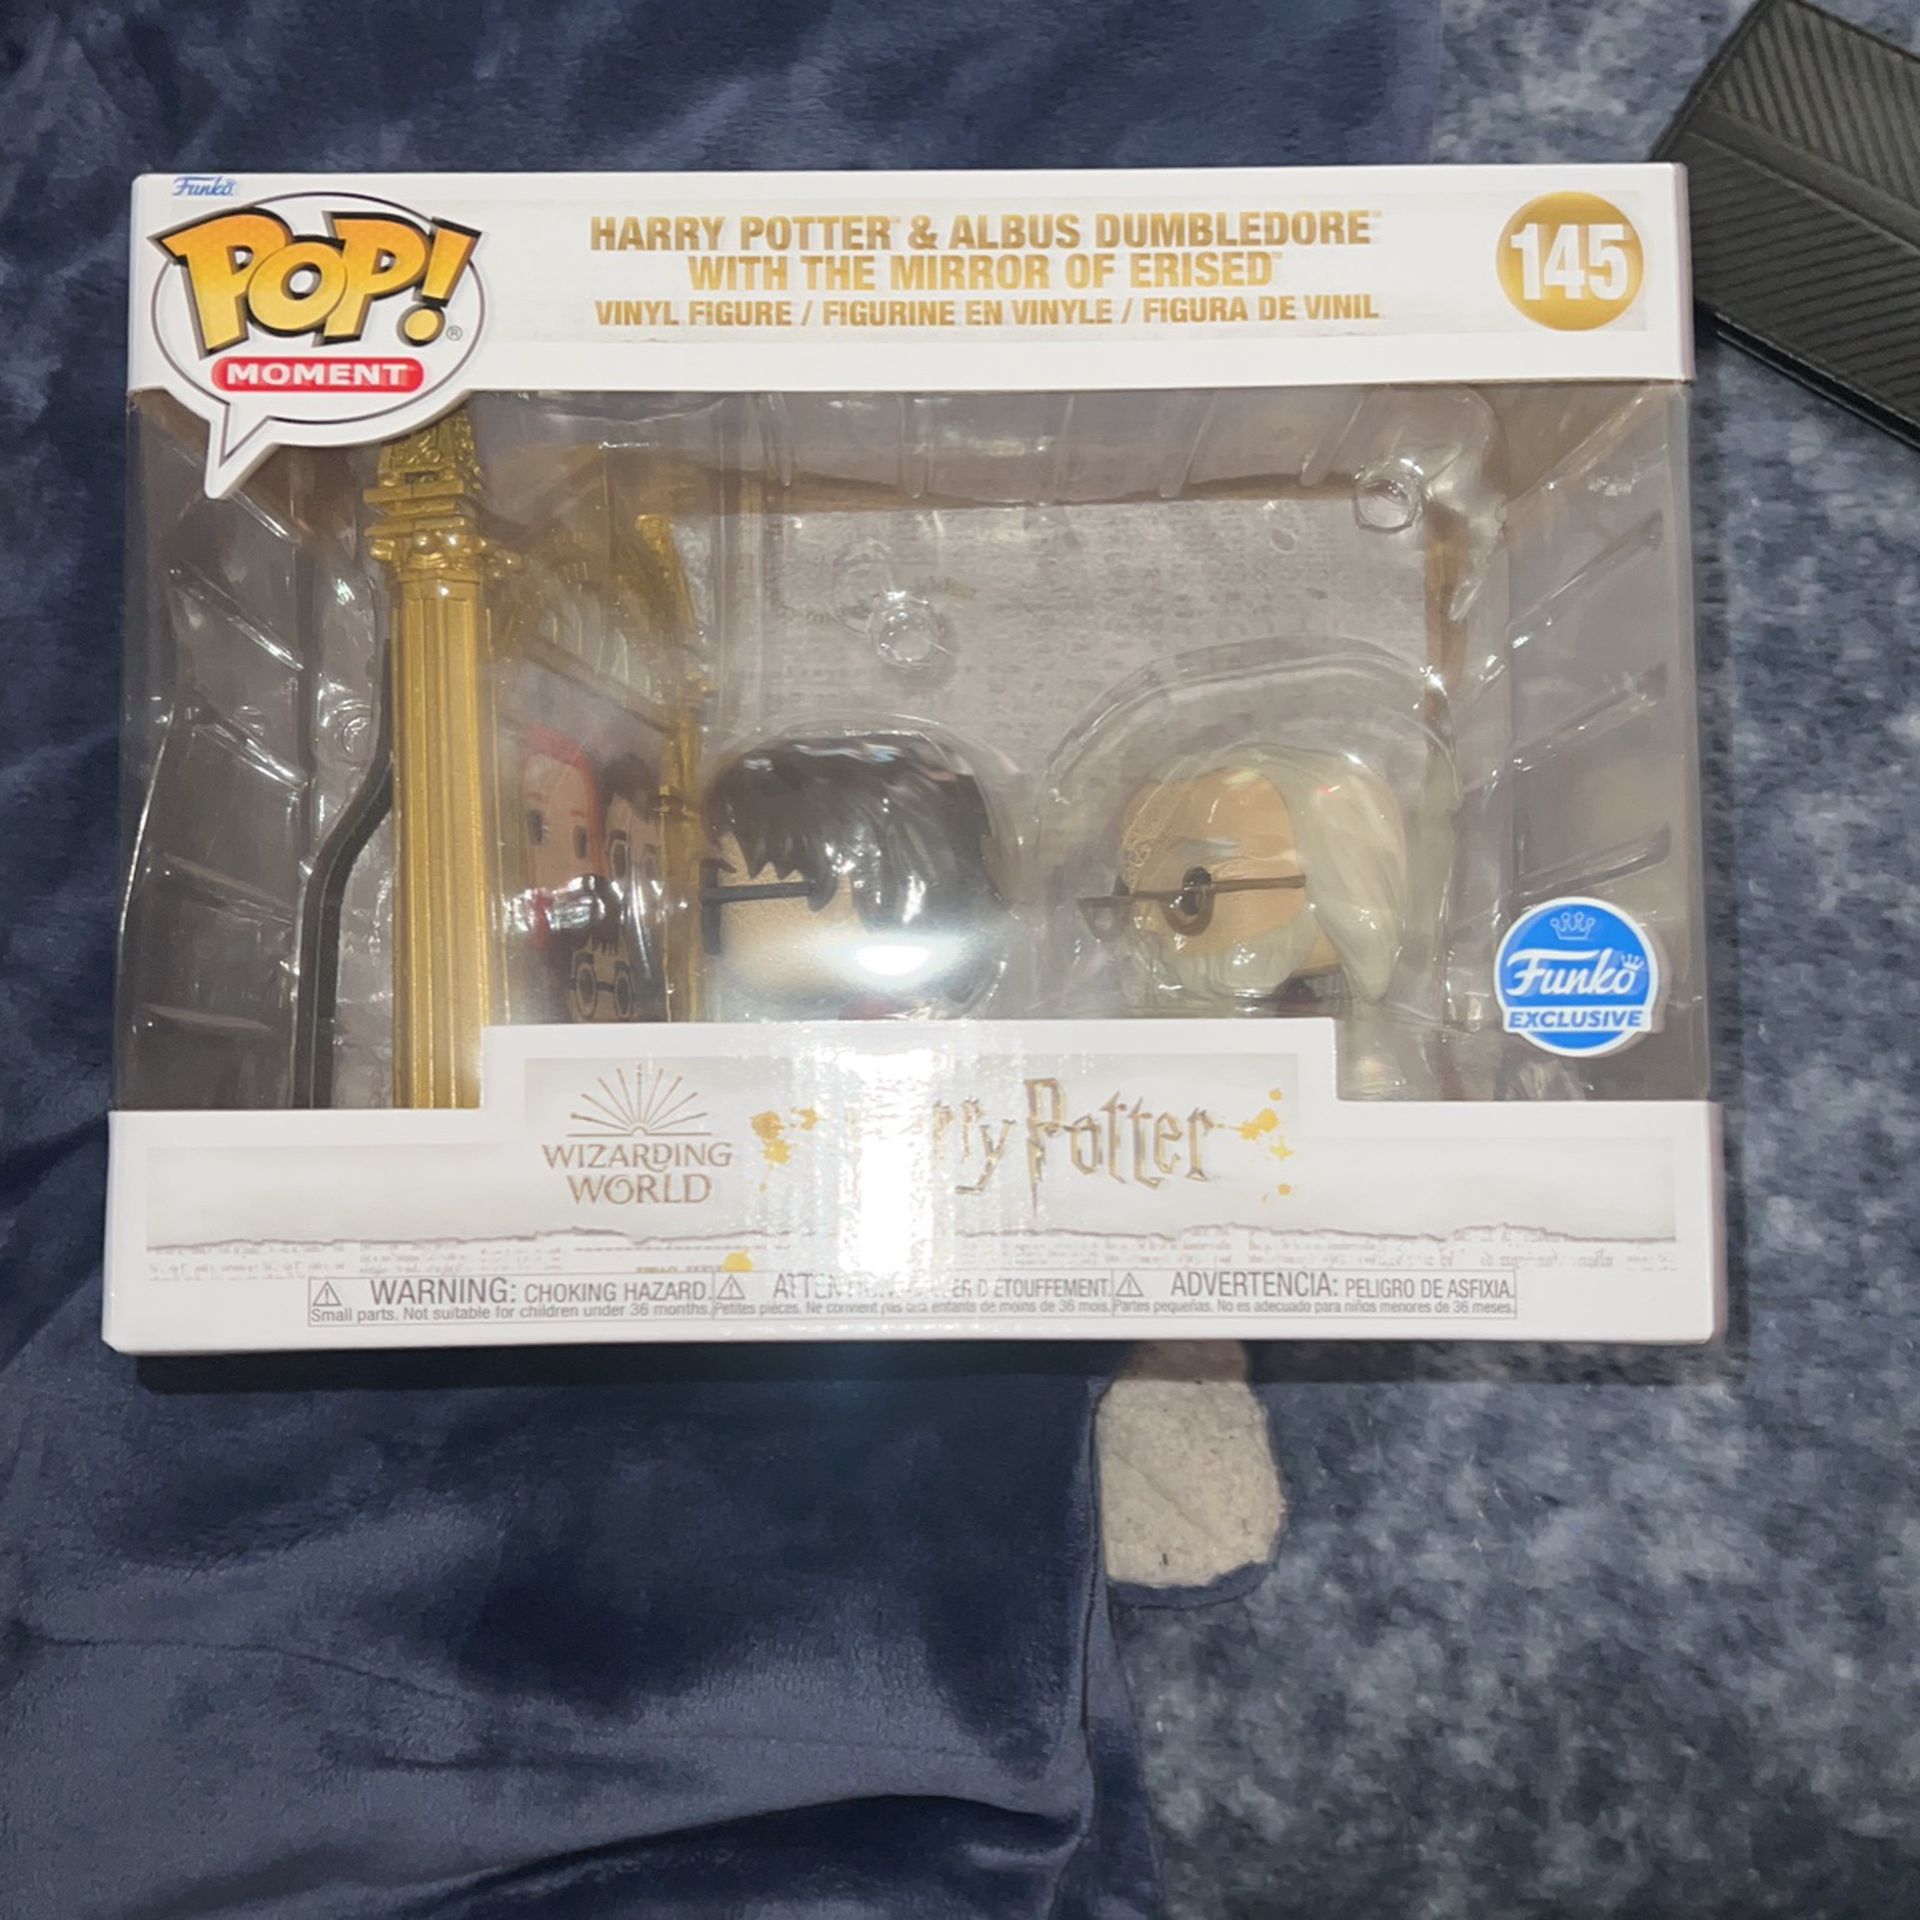 POP! MOMENT HARRY POTTER WITH DUMBLEDORE